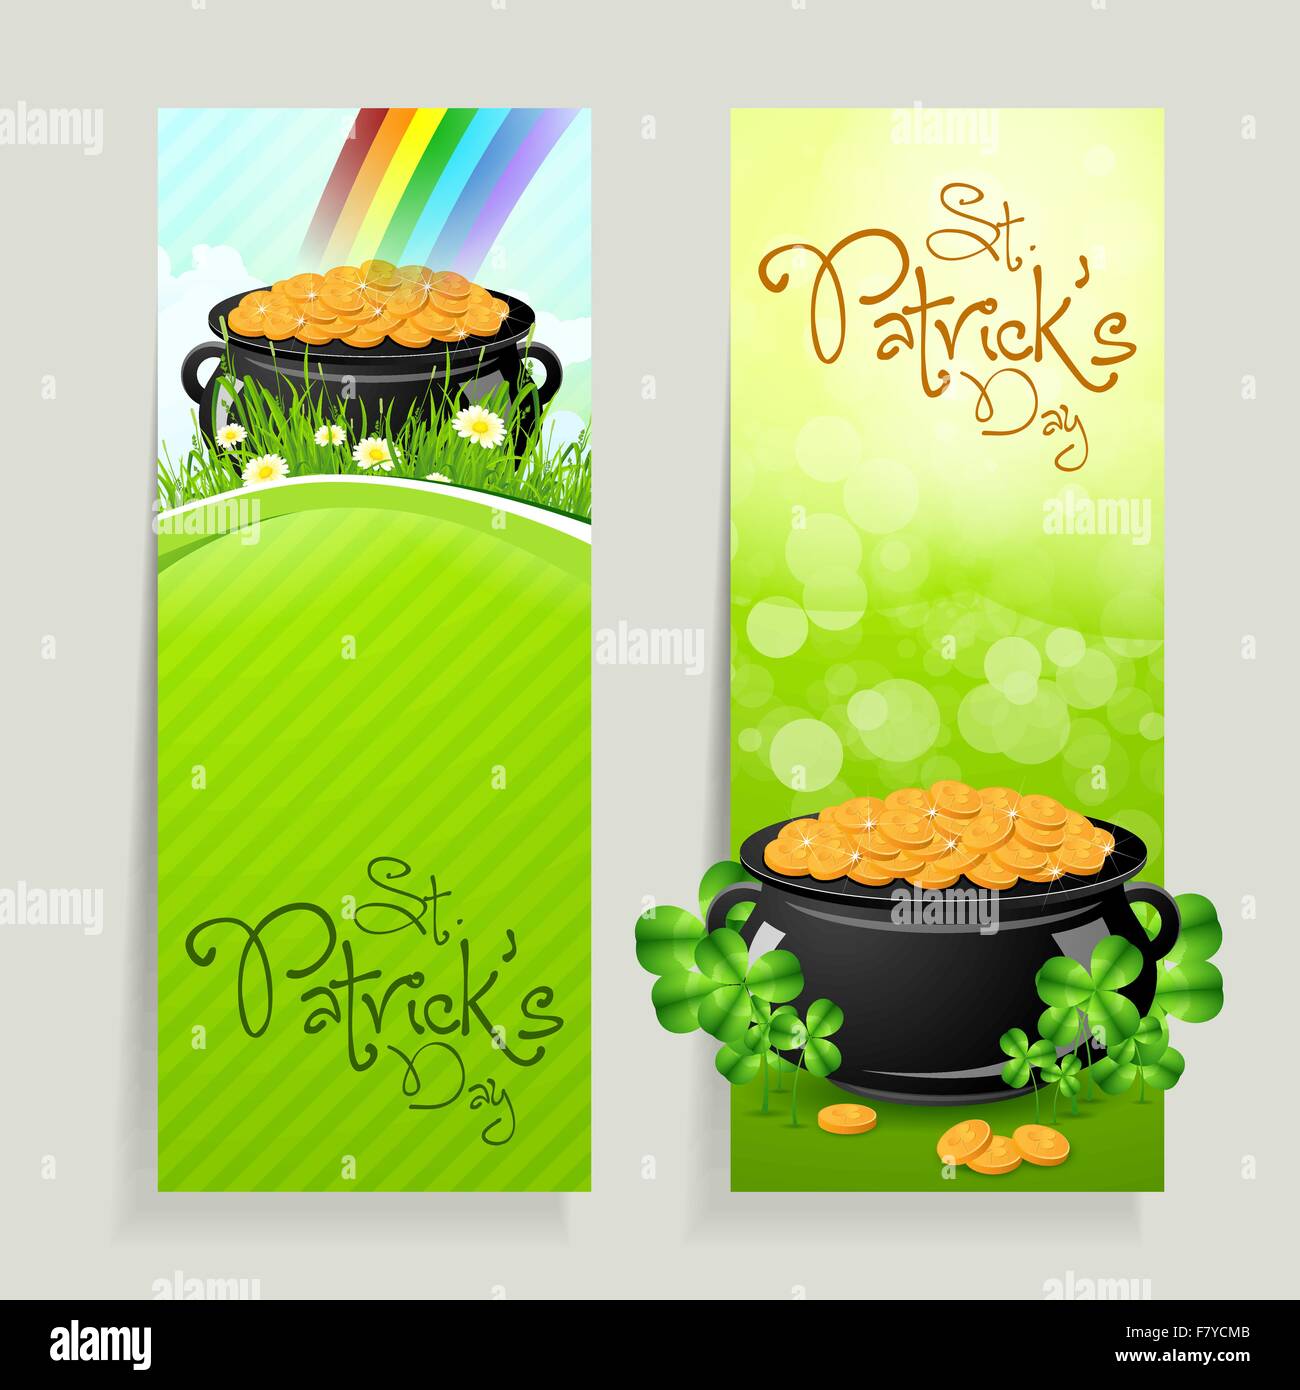 Set of St. Patricks Day Cards Stock Vector